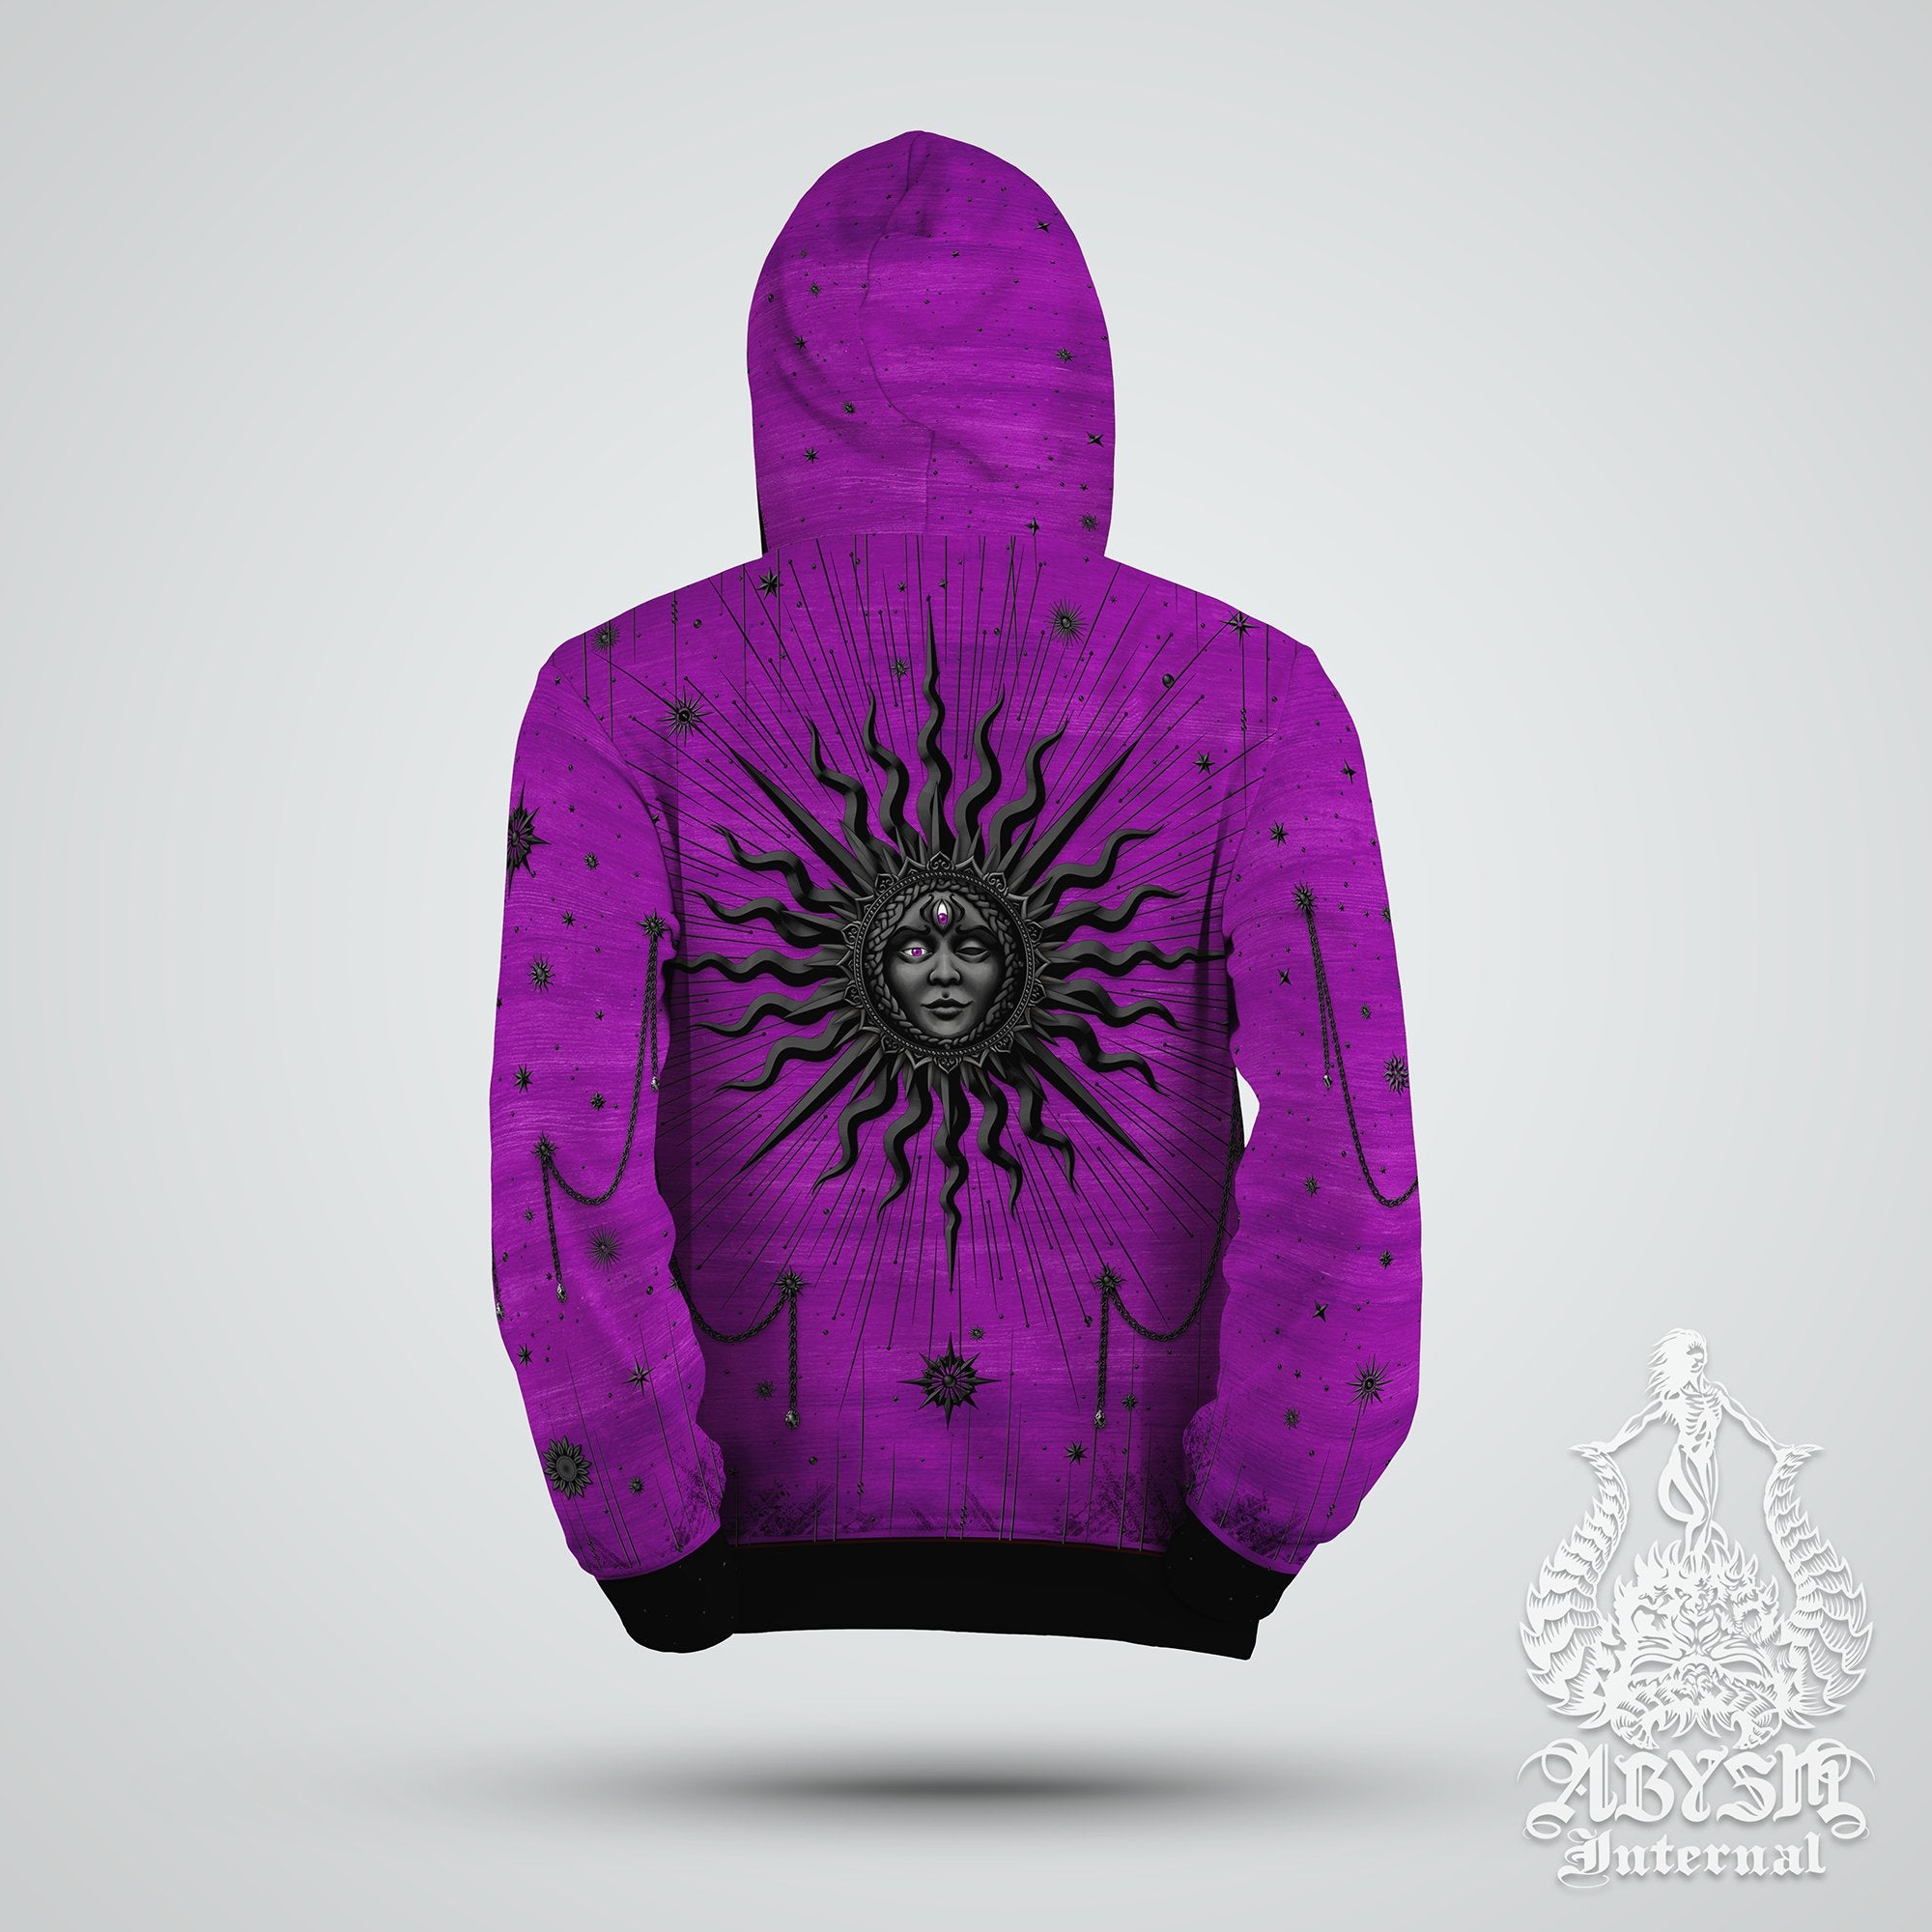 Witch Hoodie, Sun Tarot Arcana Sweater, Pastel Goth Pullover, Witchy Party Outfit, Magic and Esoteric Festival, Purple and Black Clothing, Unisex - Abysm Internal